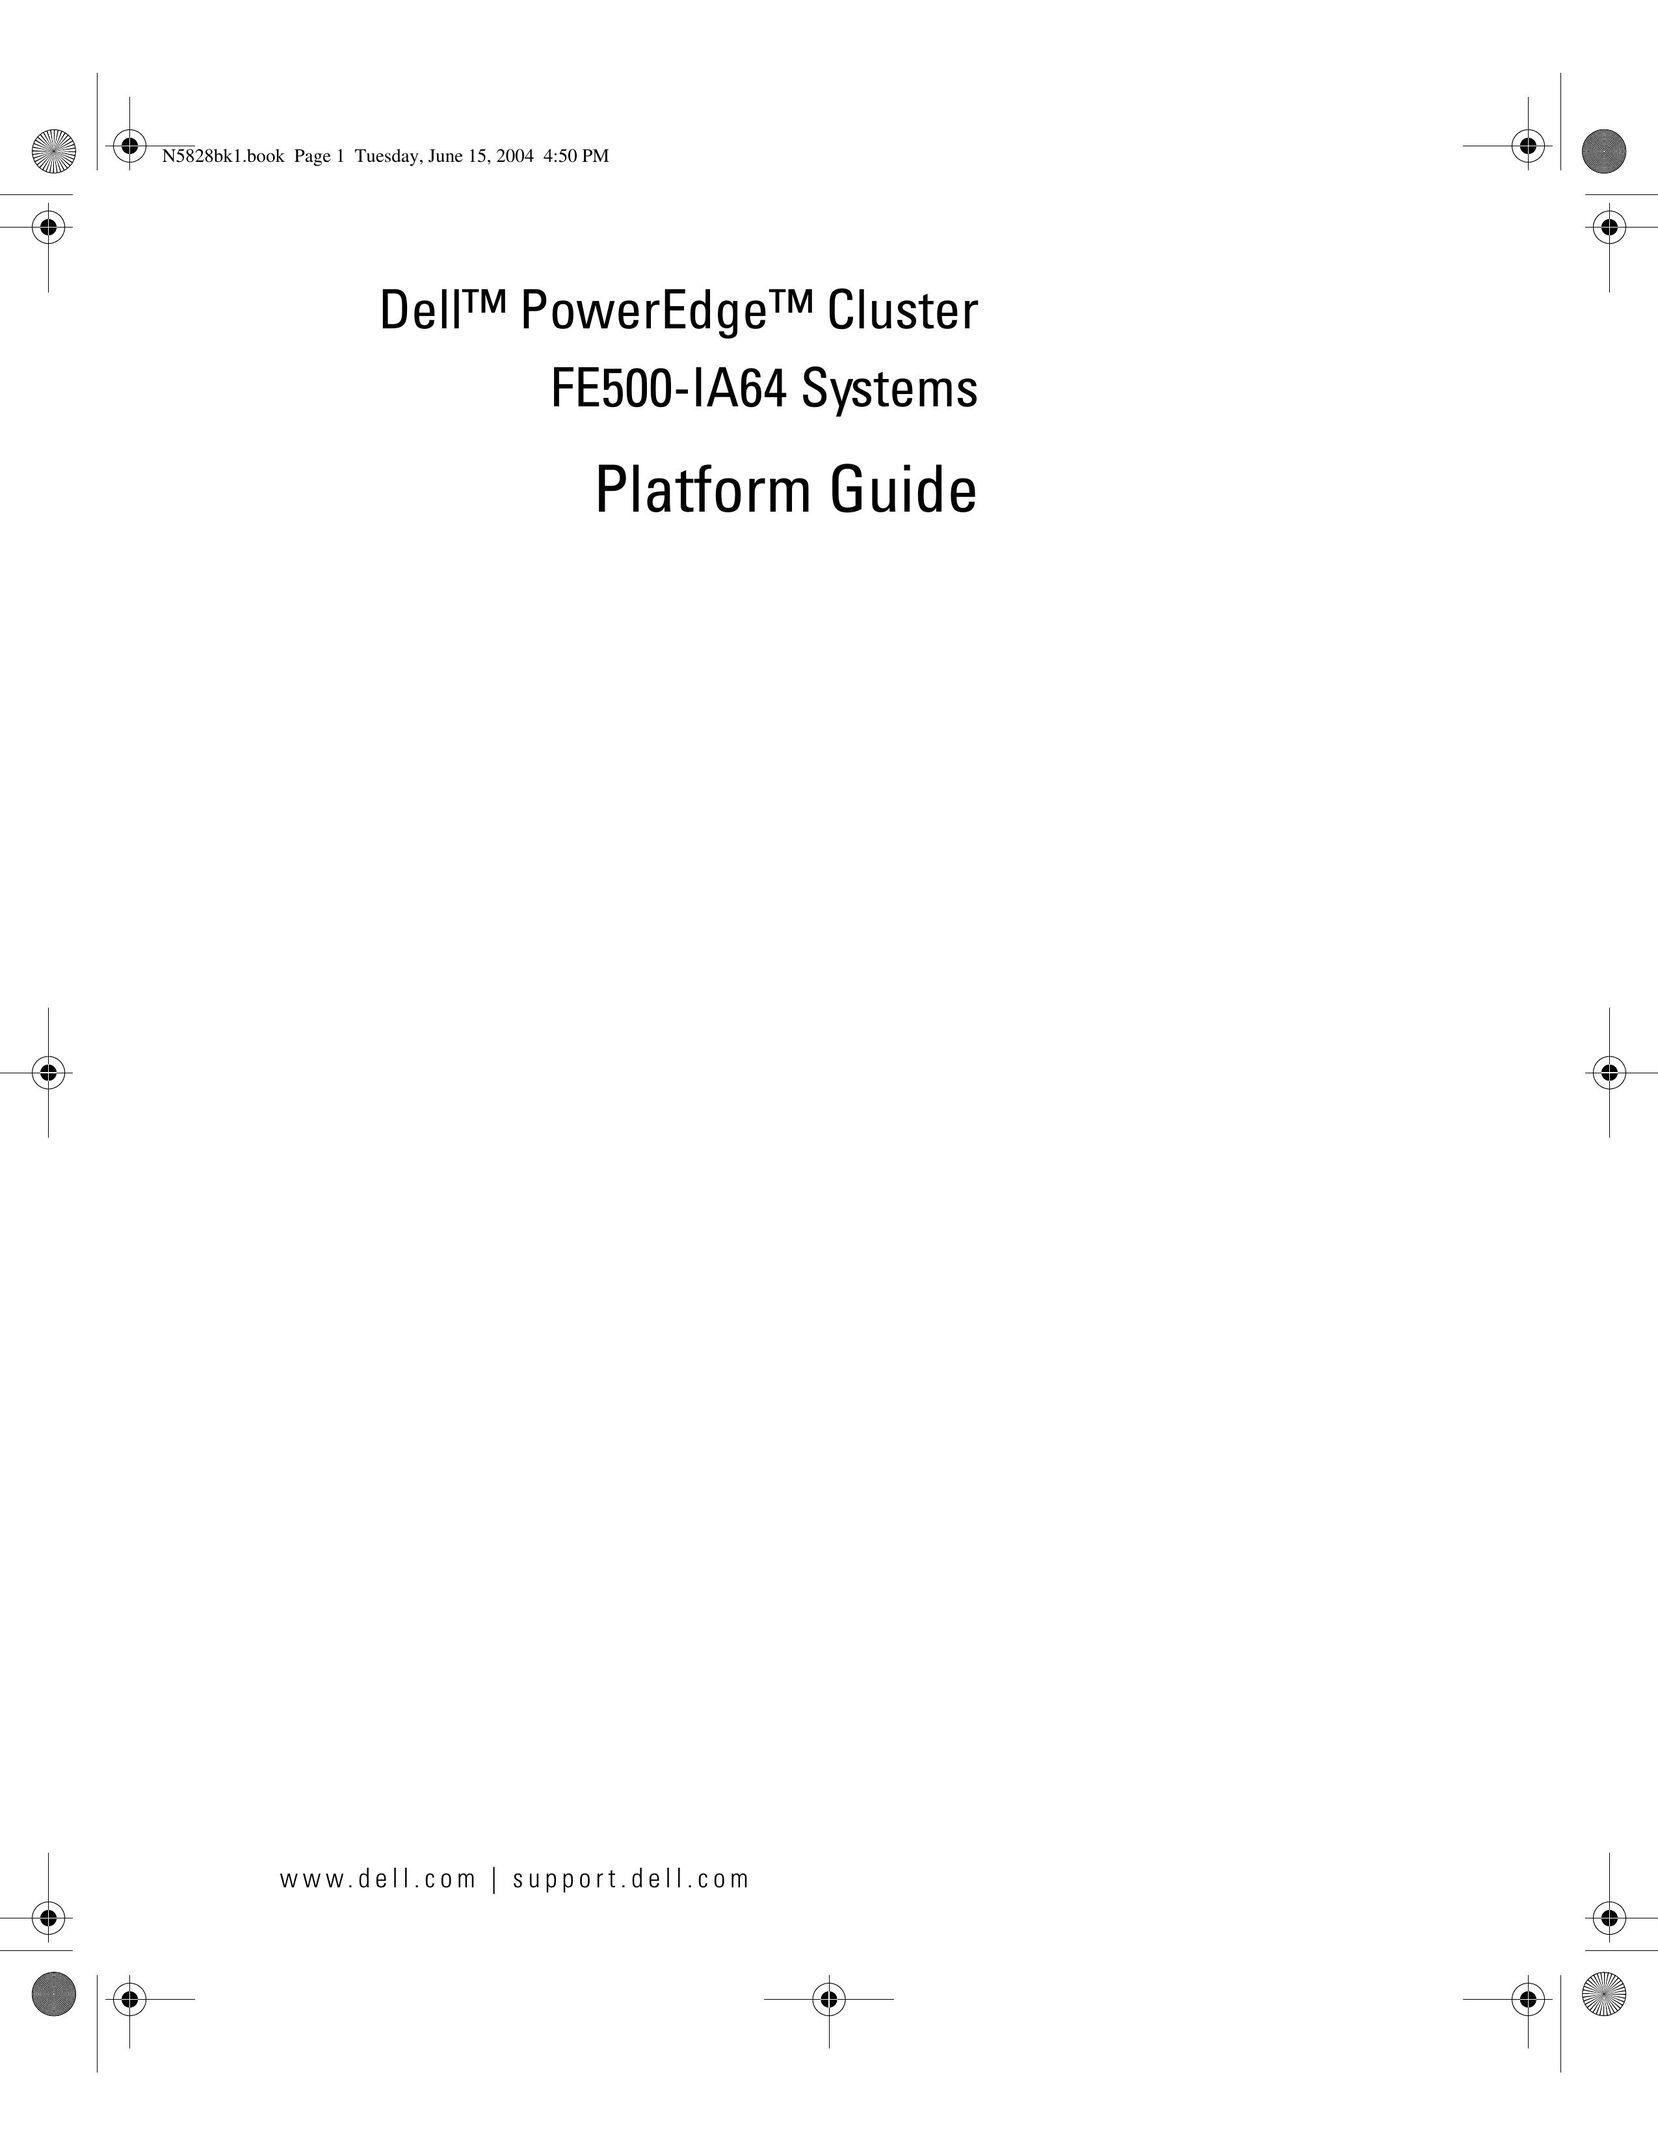 Dell FE500-IA64 SYSTEMS Computer Hardware User Manual